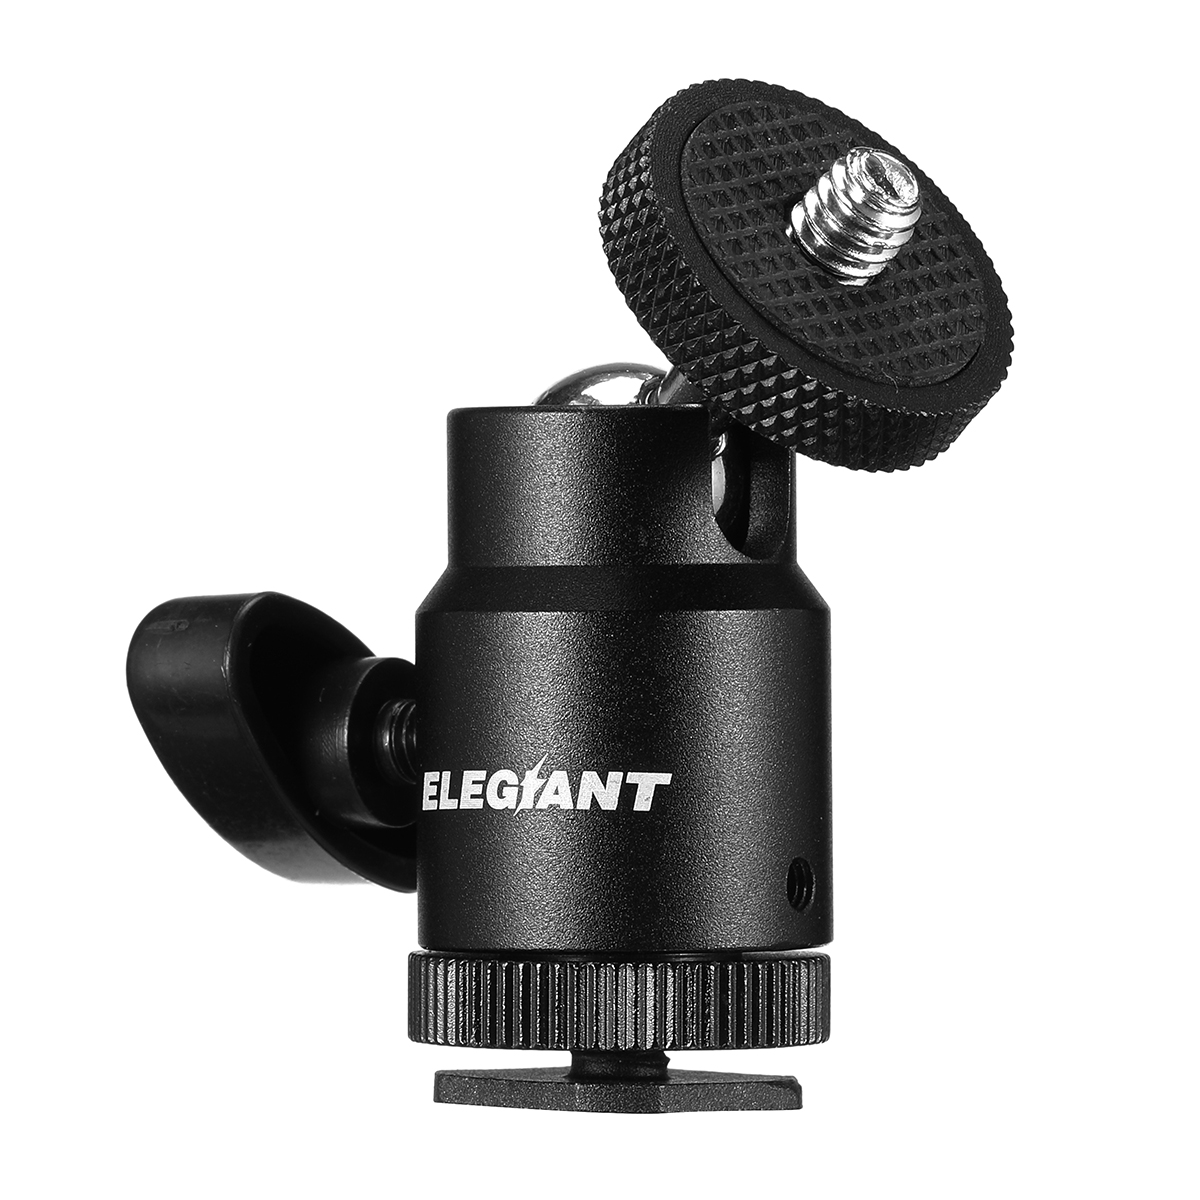 Find ELEGIANT EGPA05 Double Cold Boots Plus 1/4 Magic Arm Plus 1/4 Gimbal Accessories for Sale on Gipsybee.com with cryptocurrencies